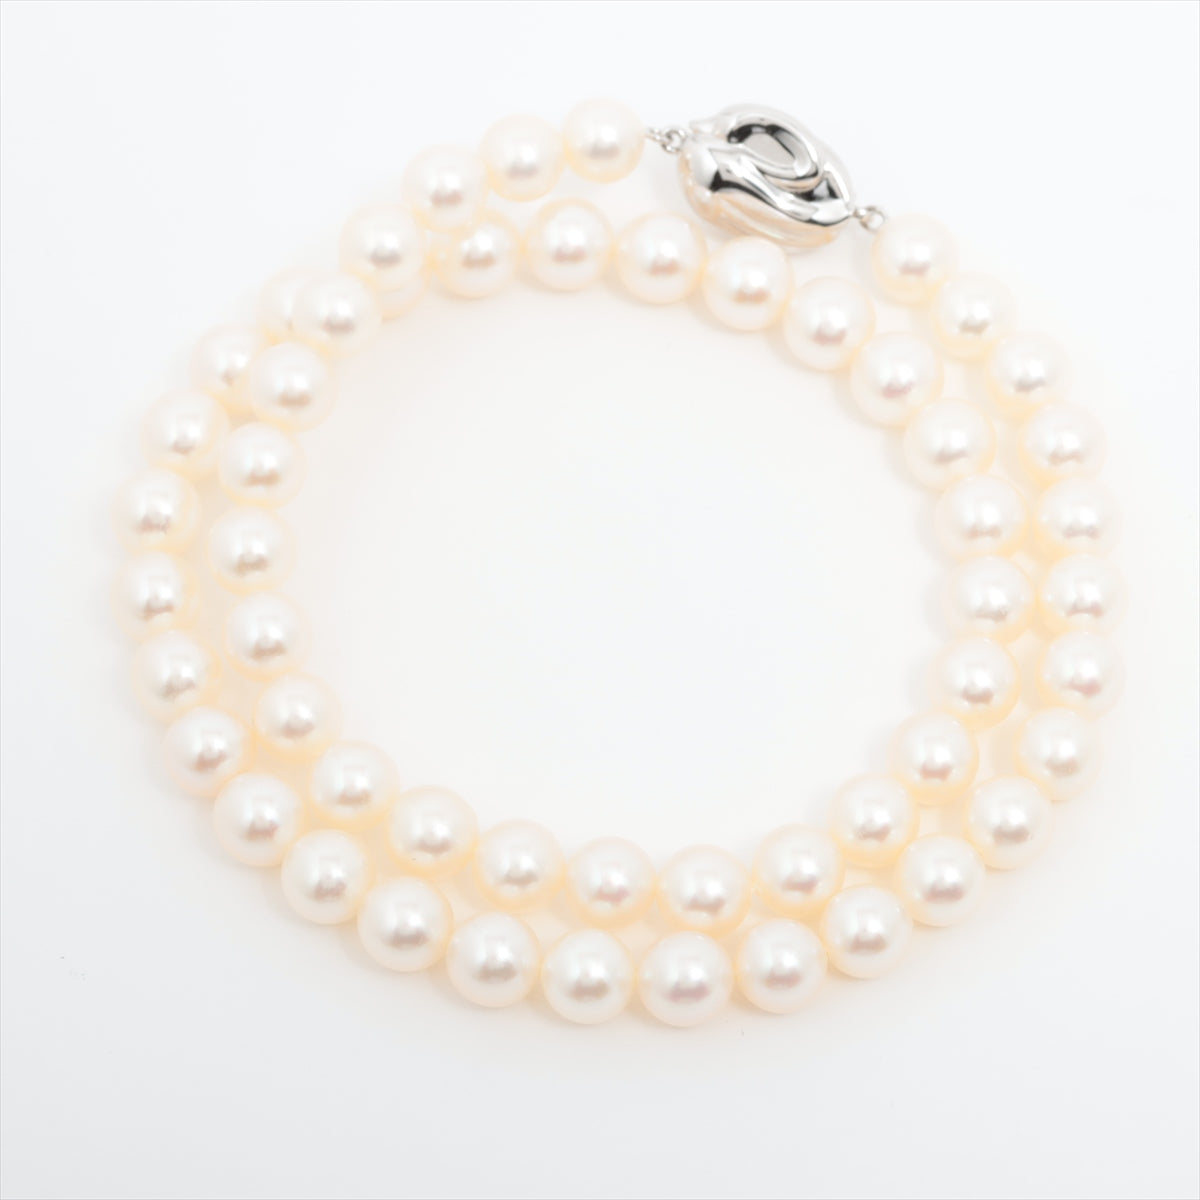 TASAKI Pearl Necklace SV Total 38.4g Approx. 7.5mm-8.0mm